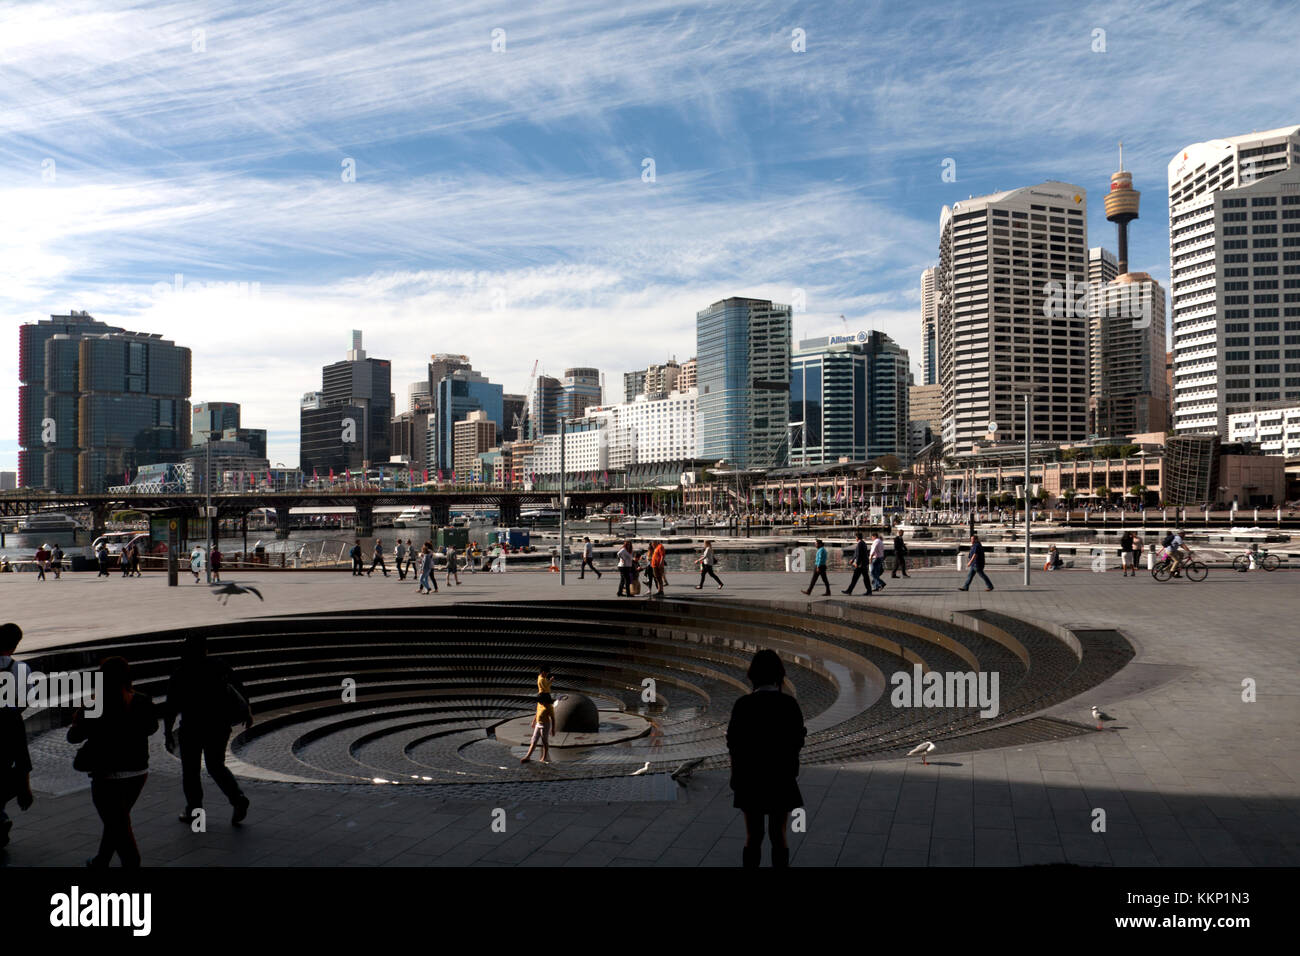 tidal cascades outside ICC sydney darling harbour sydney new south wales australia Stock Photo